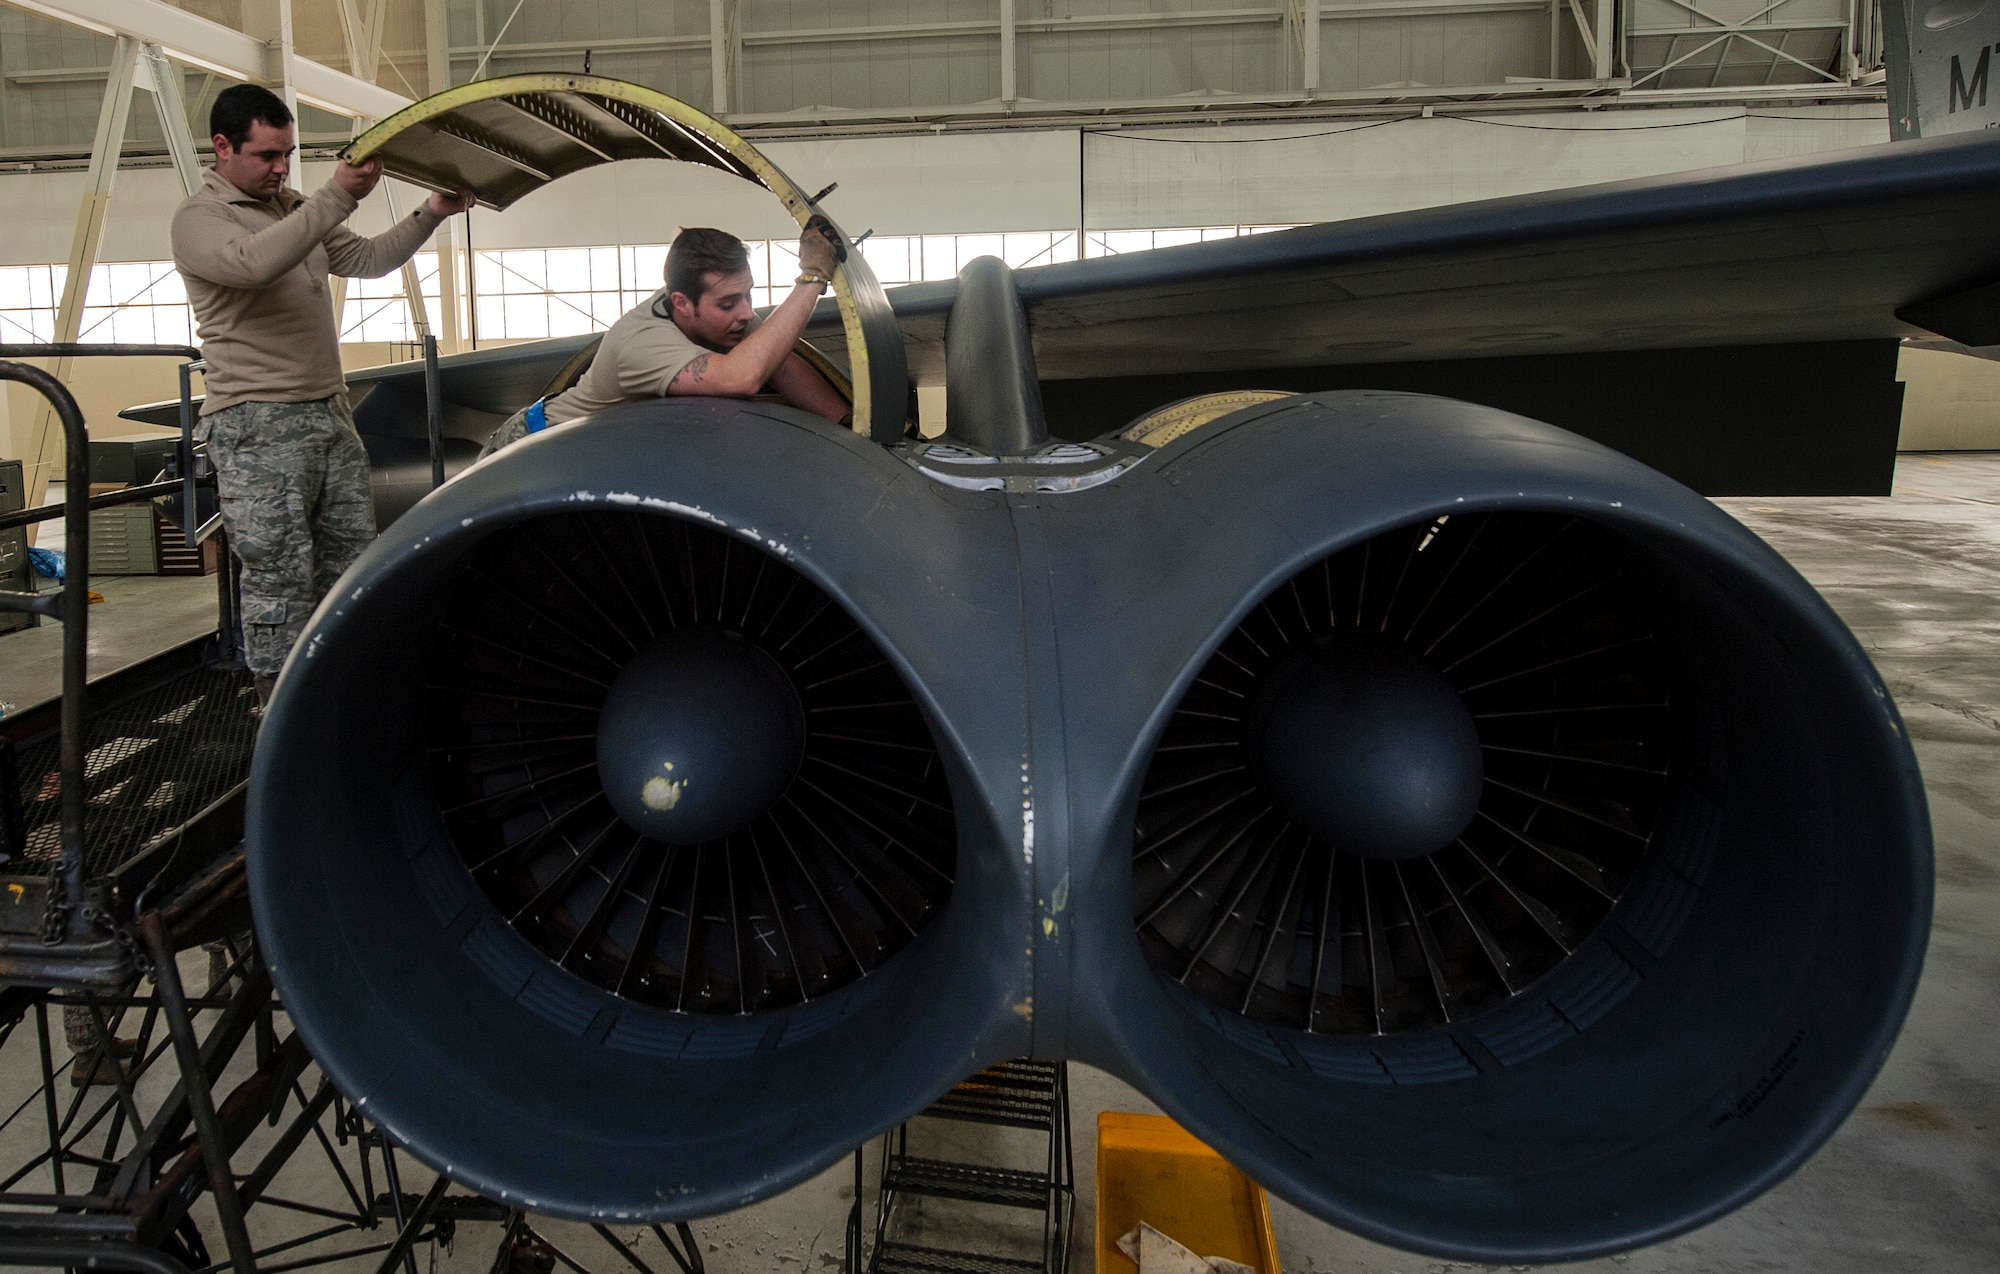 (From left) Senior Airman Allan Jungst and Staff Sgt. Alex Yount, 5th Maintenance Squadron crew chiefs, install an upper wrap cowling at Minot Air Force Base, N.D., March 20, 2017. The crew chiefs coordinate and perform aircraft maintenance to ensure all aircraft components are functioning properly. (U.S. Air Force photo/Airman 1st Class Jonathan McElderry)